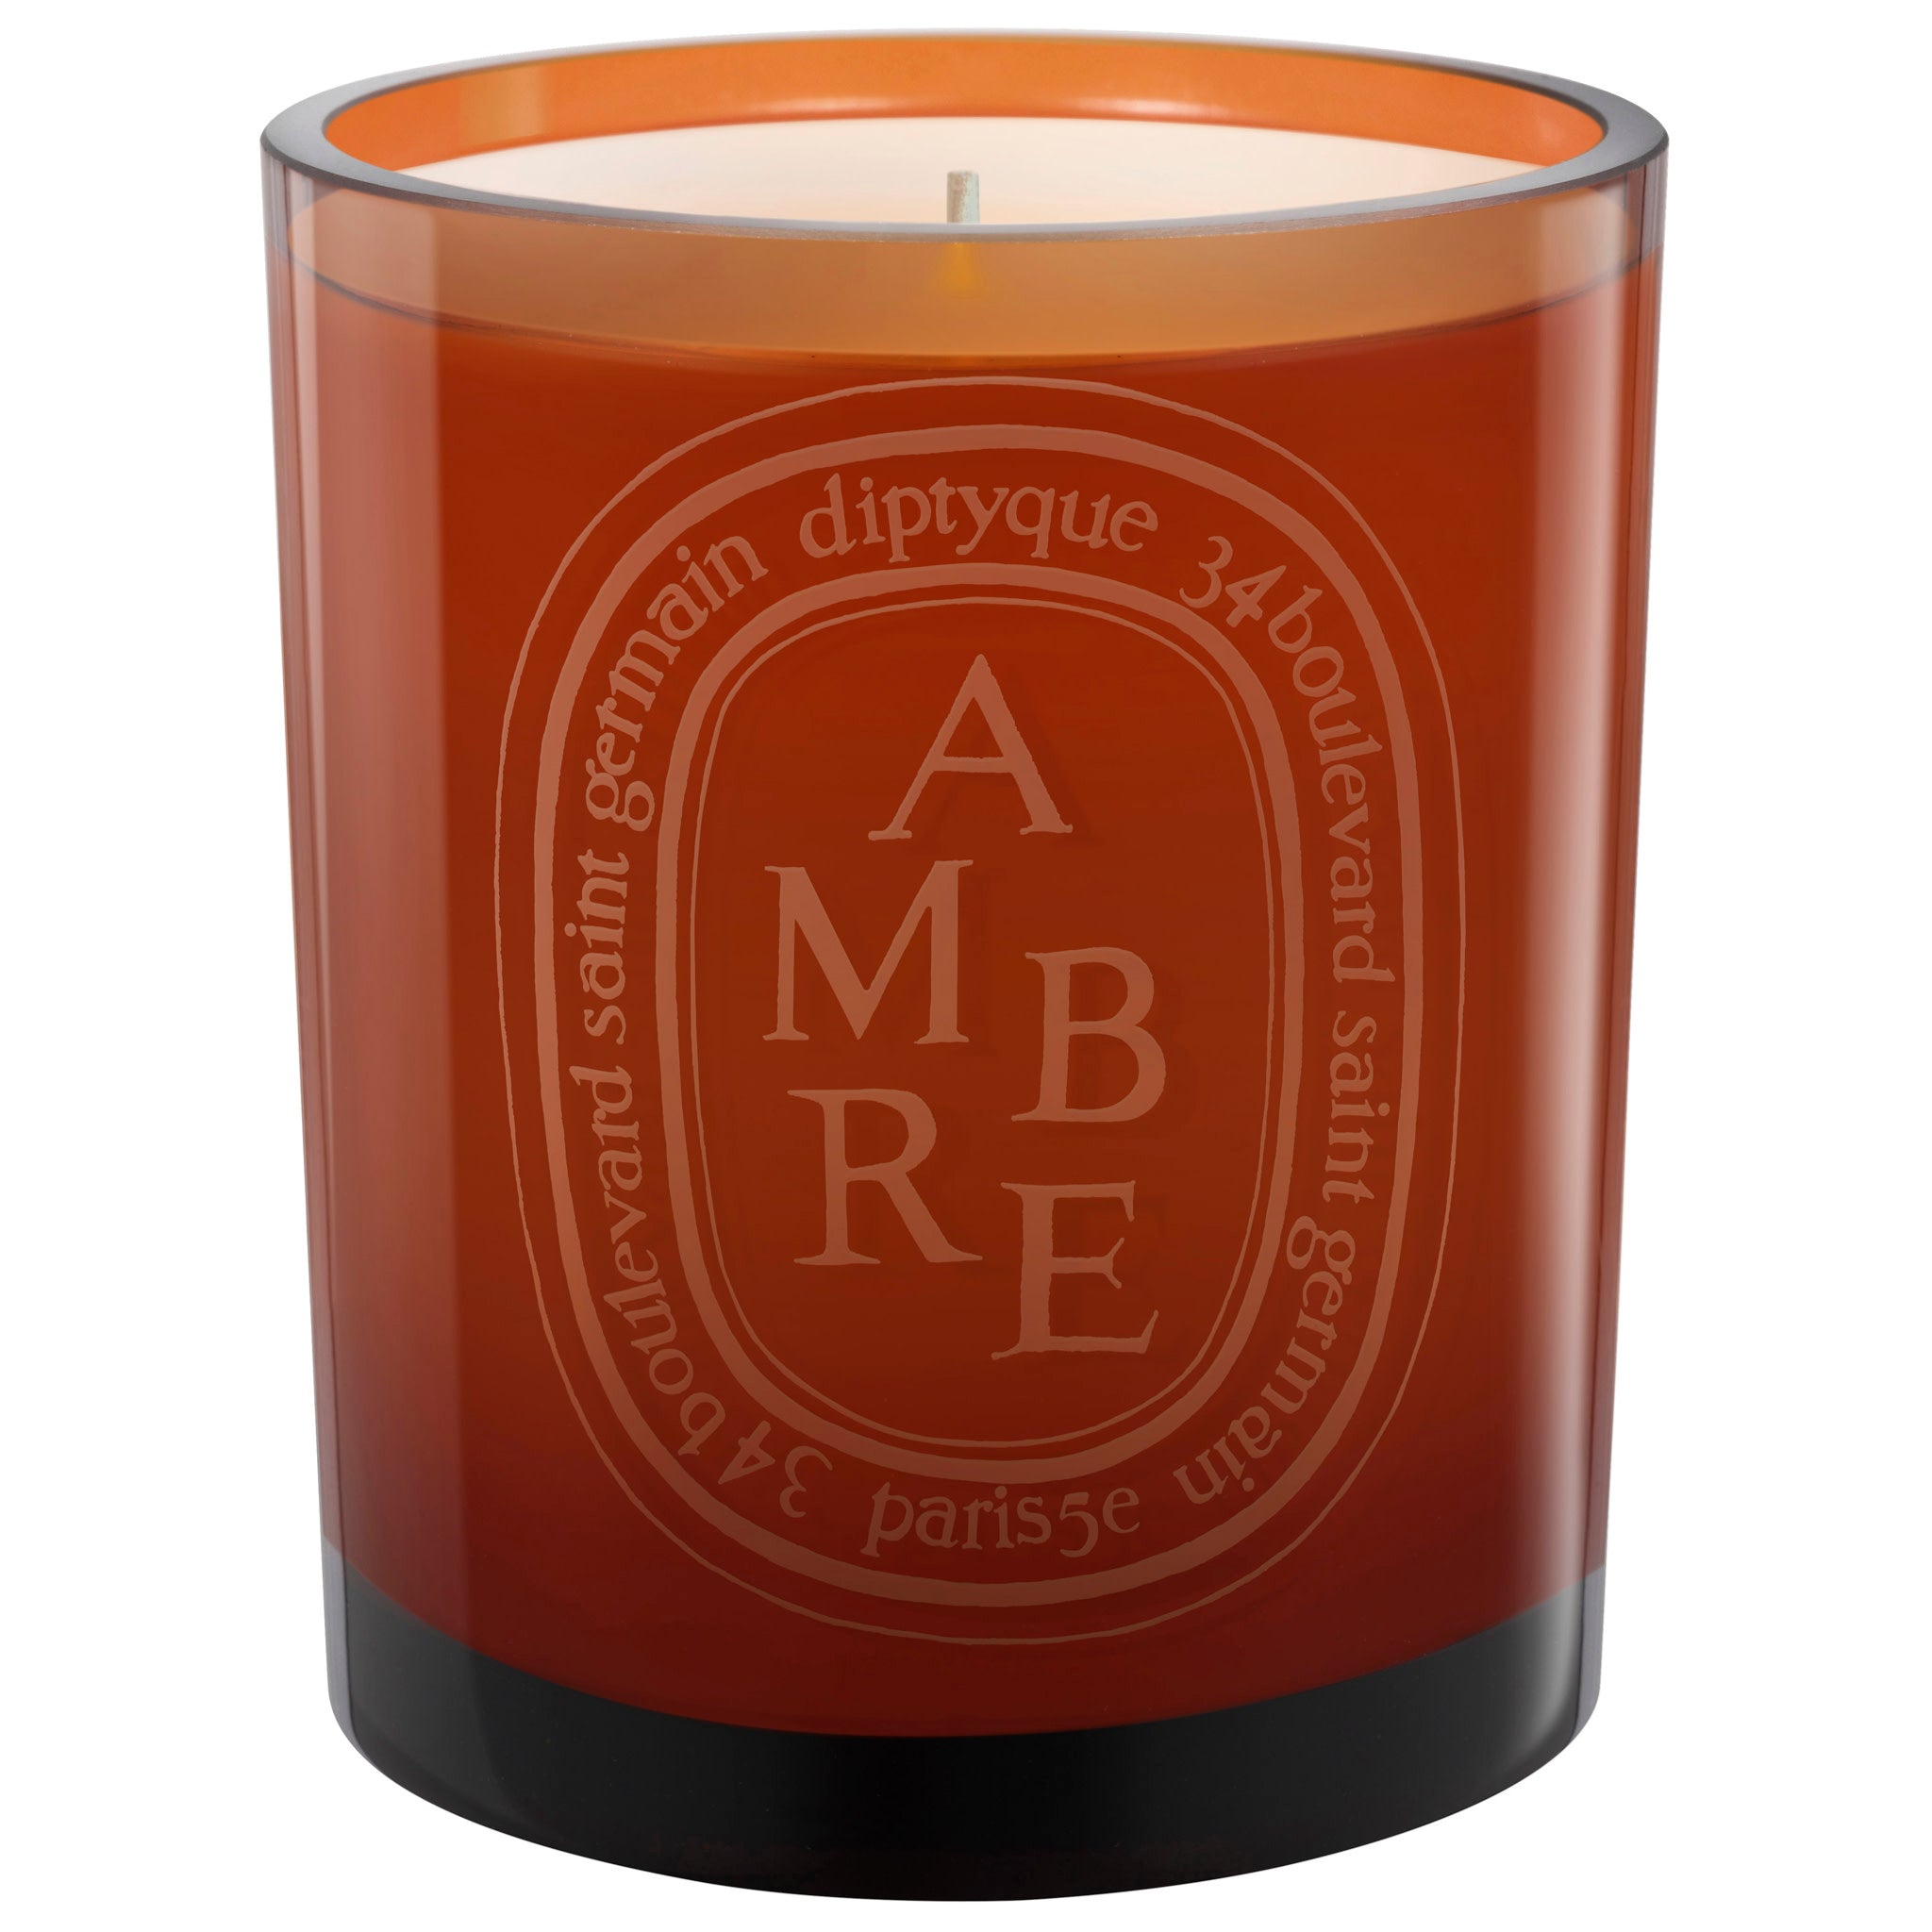 Diptyque Cognac Amber Candle main image.